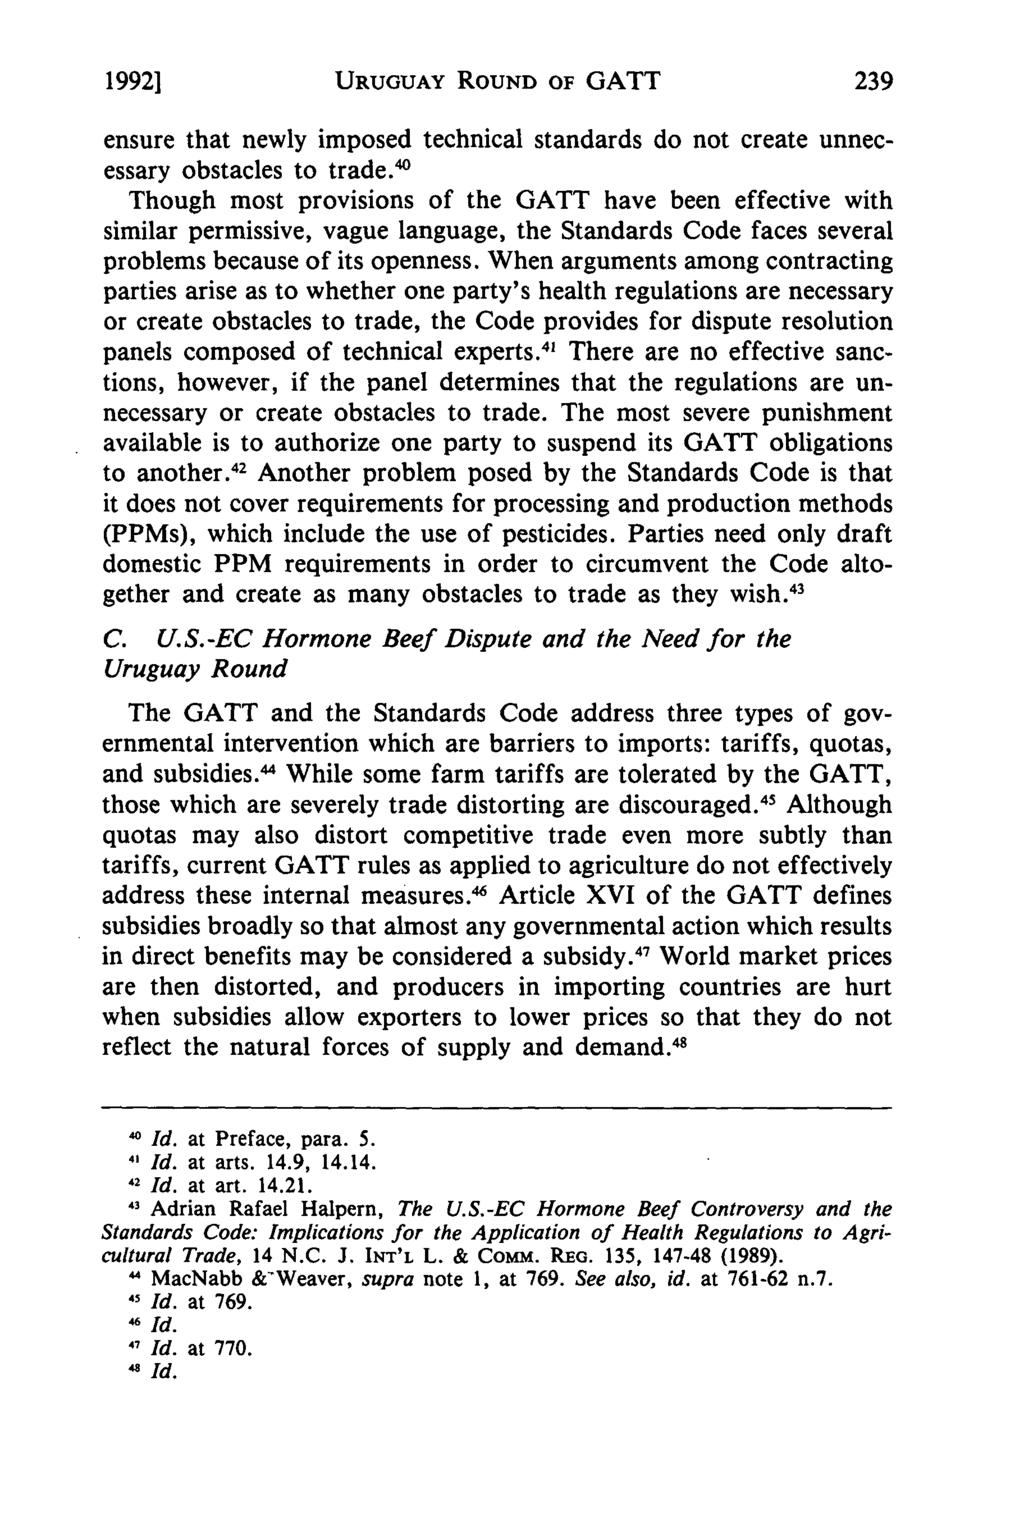 19921 URUGUAY ROUND OF GATT ensure that newly imposed technical standards do not create unnecessary obstacles to tradey Though most provisions of the GATT have been effective with similar permissive,